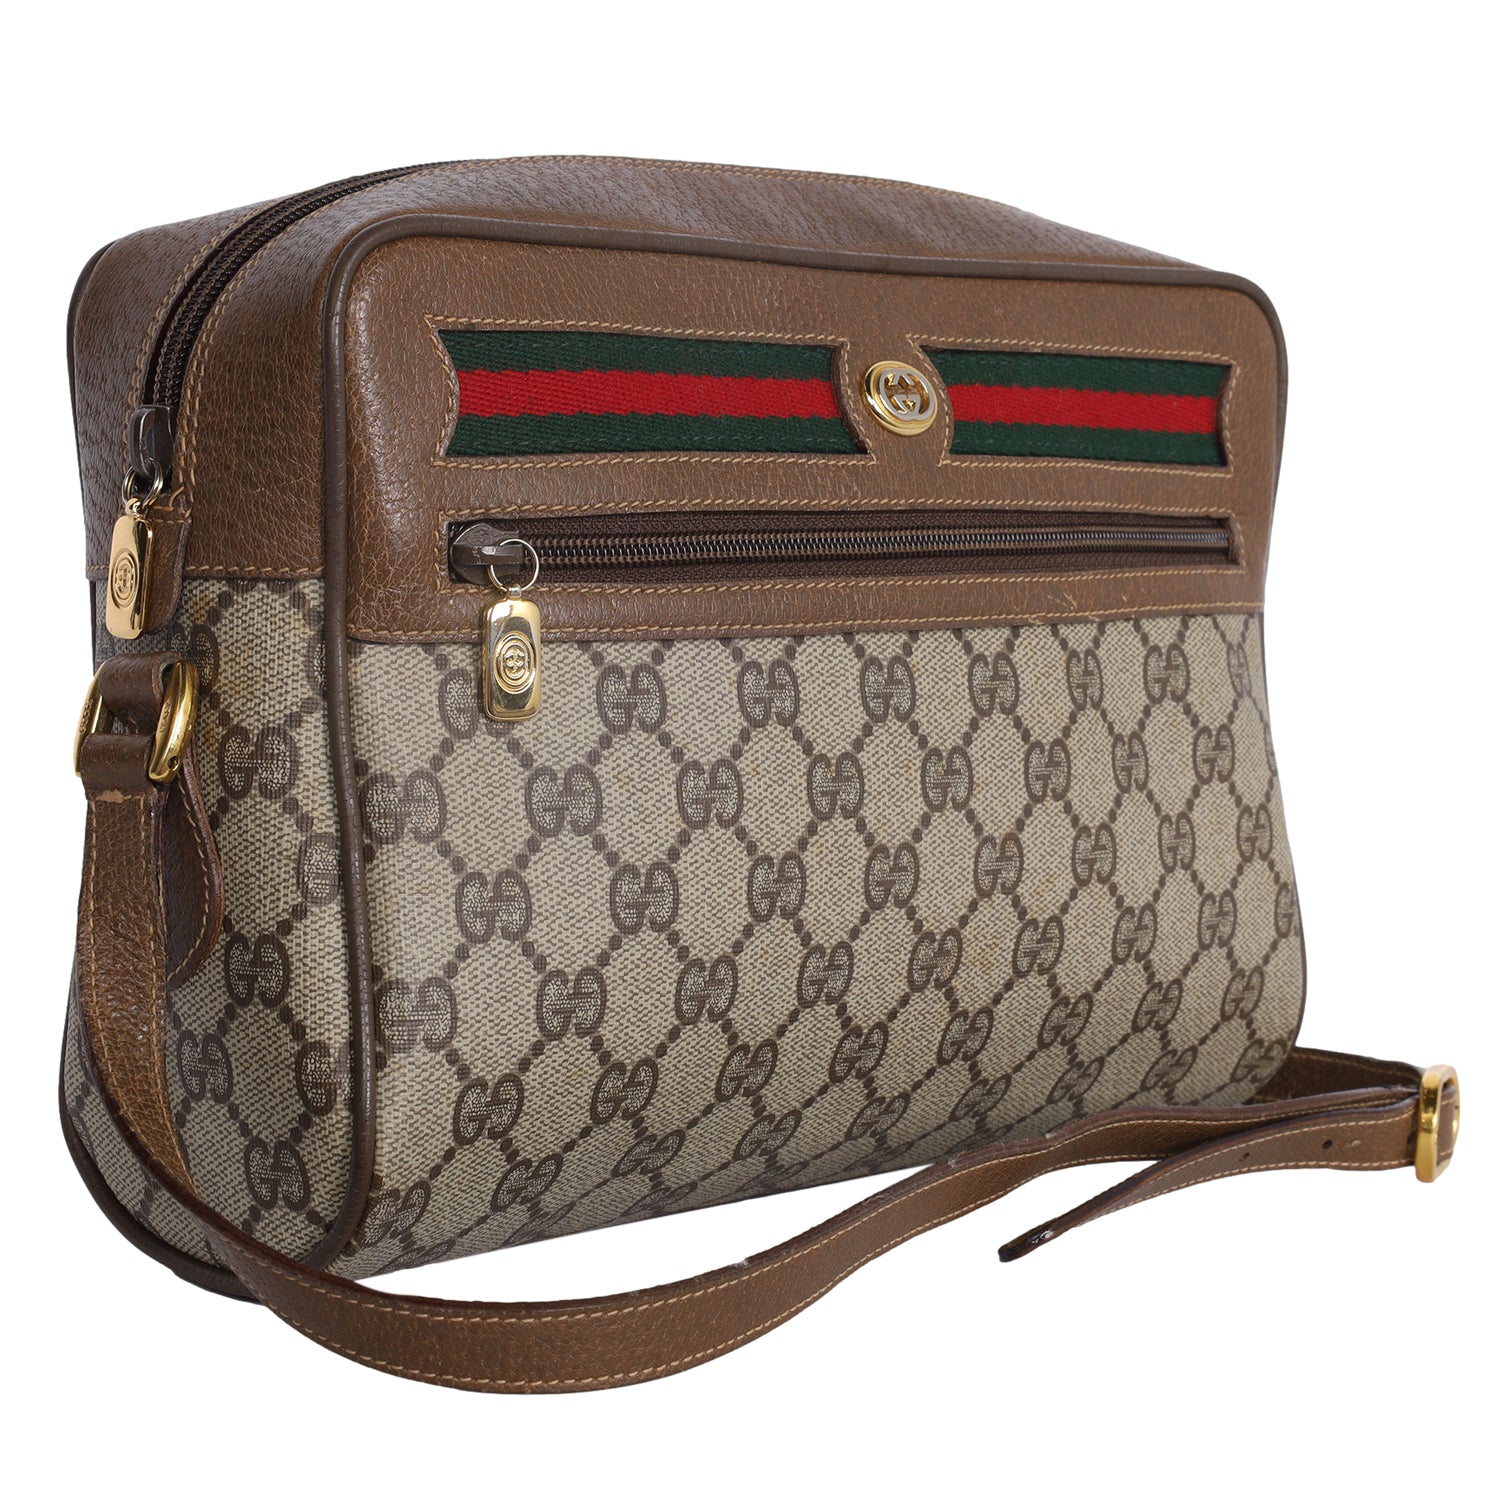 Gucci Ophidia GG Supreme Canvas Pouch at Jill's Consignment